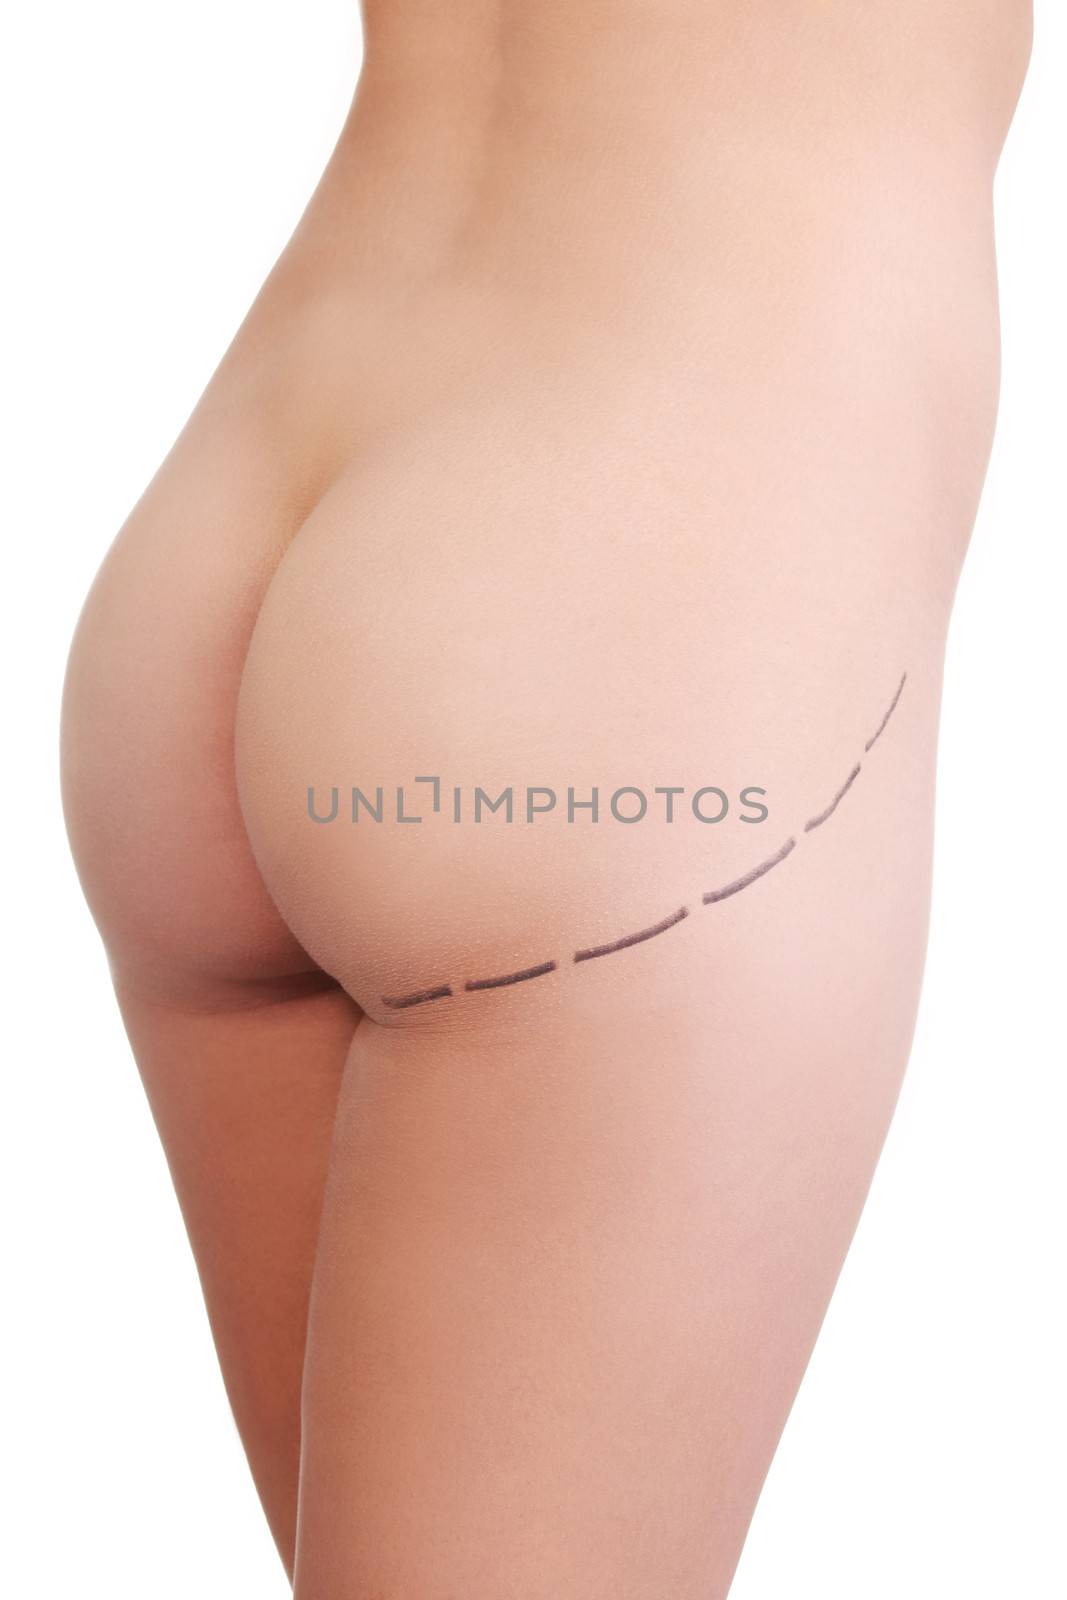 Woman's buttock prepared to plastic surgery , isolated on white